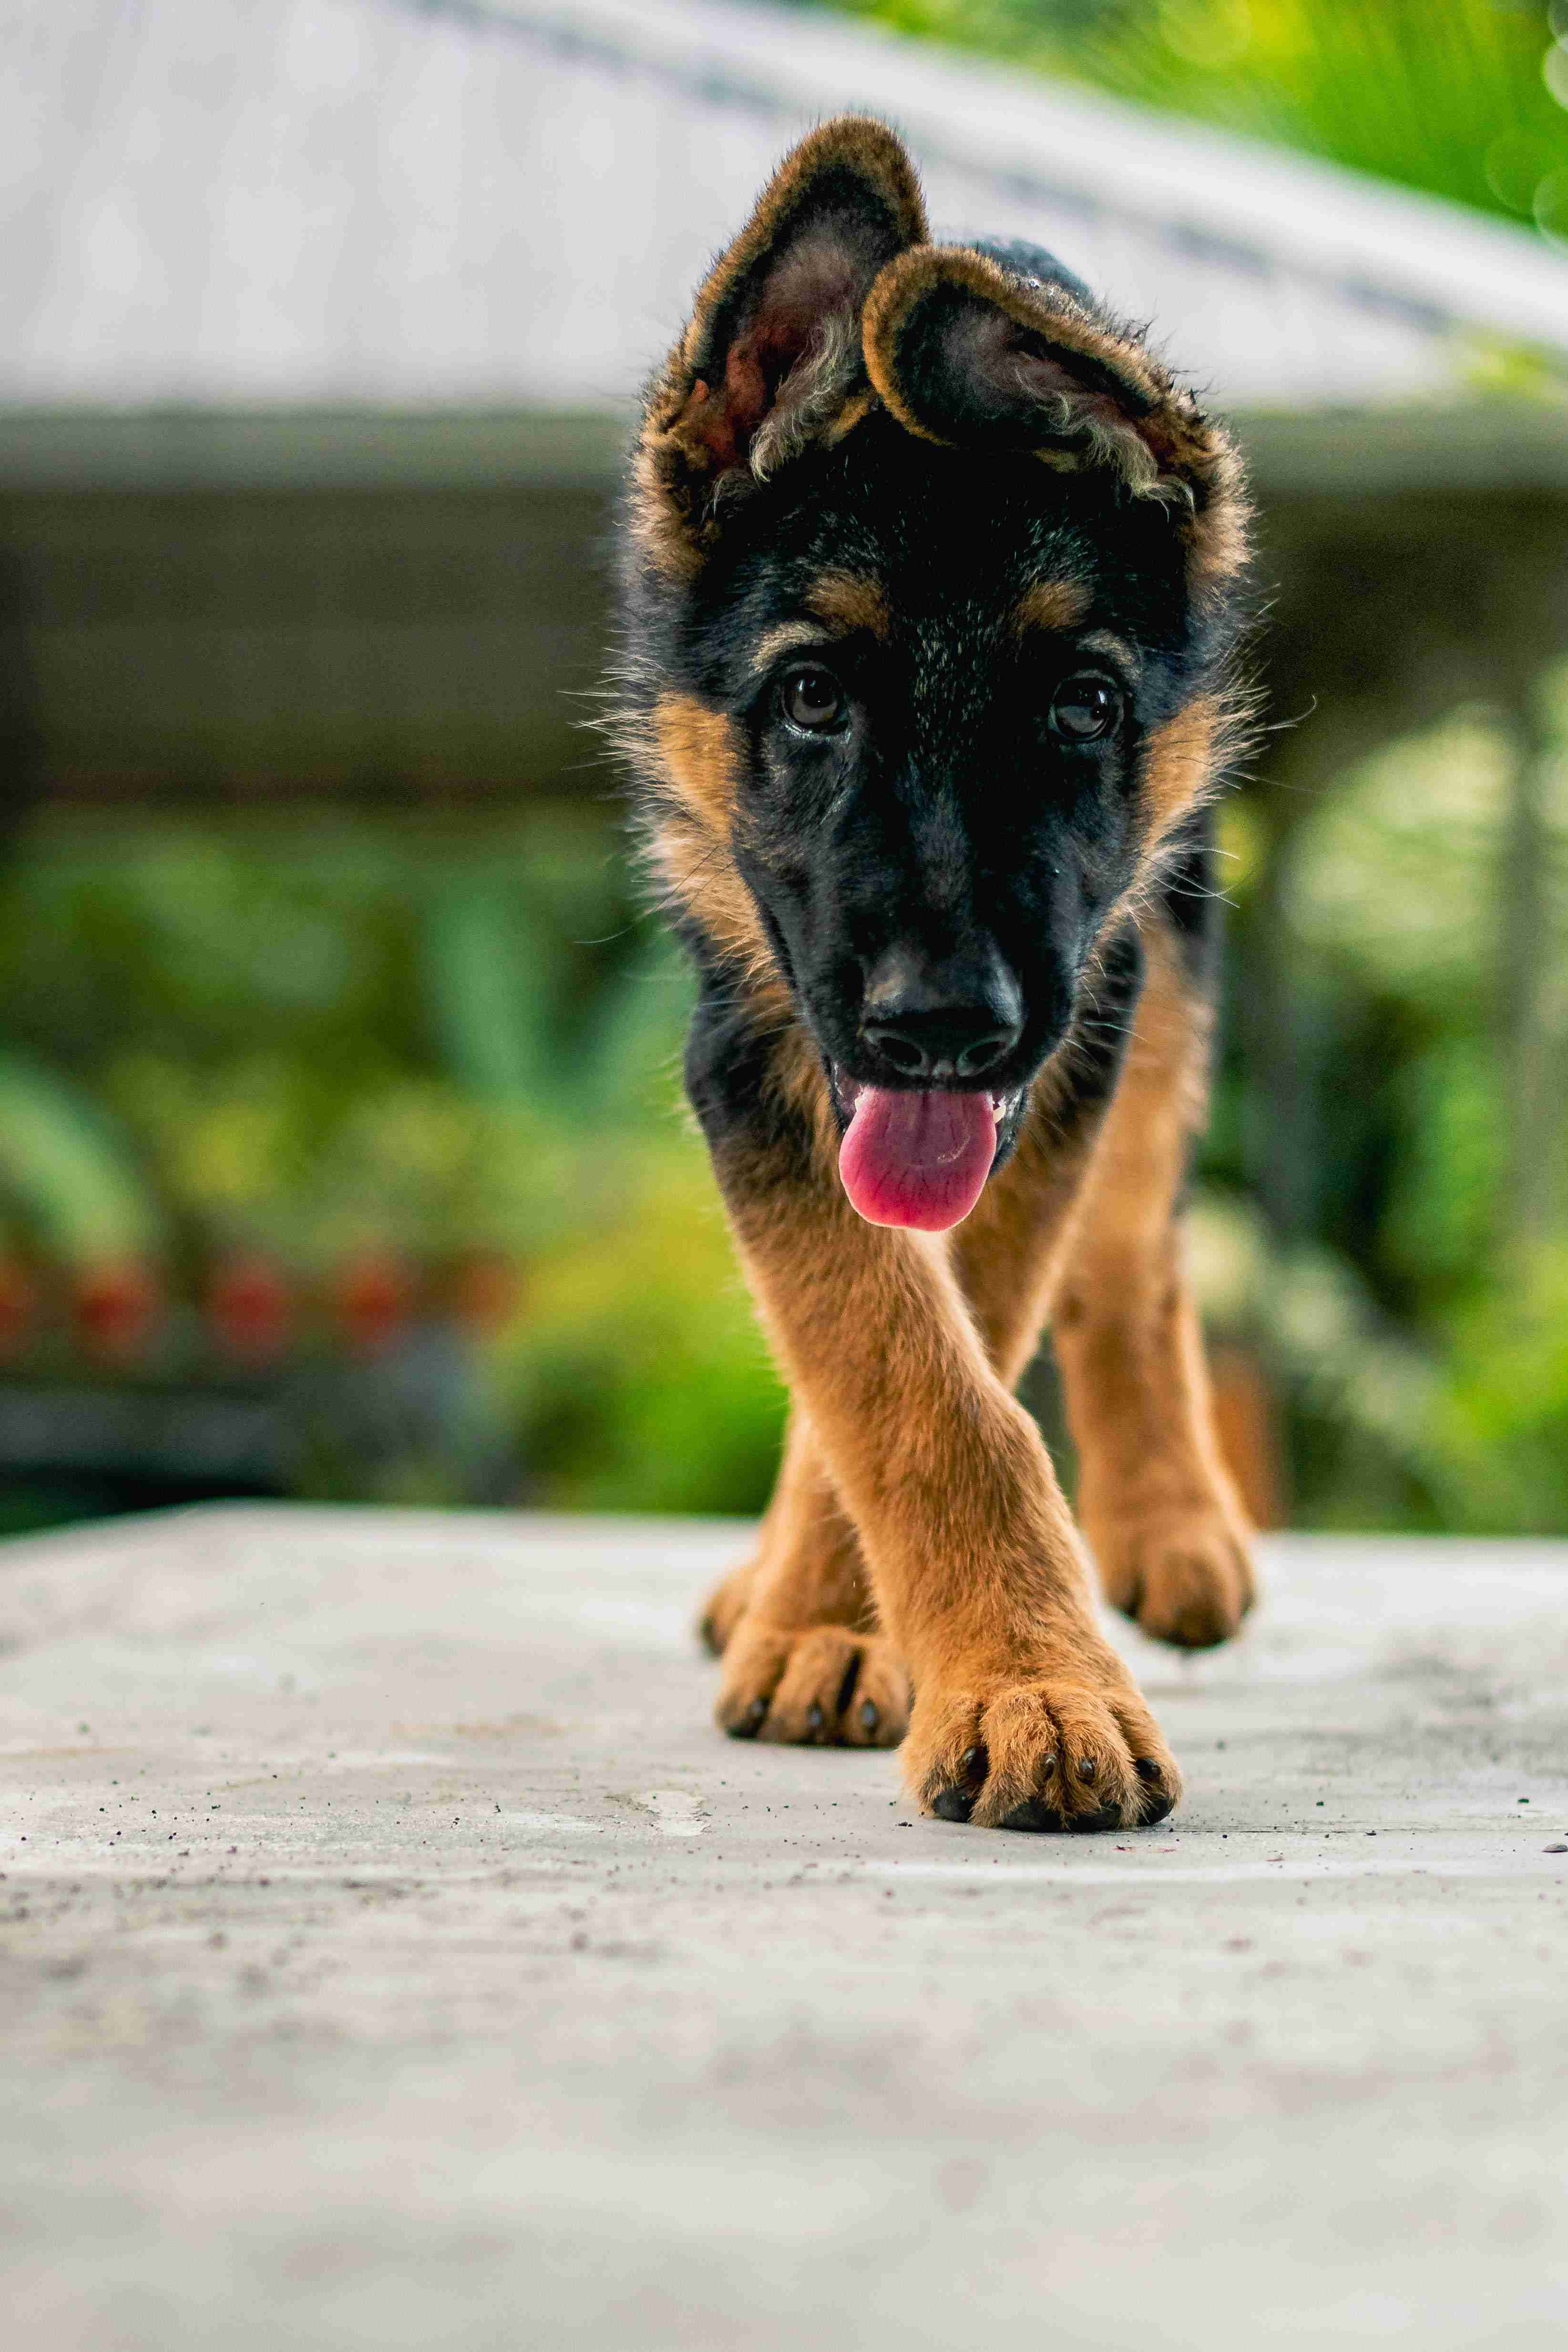 How do you introduce a German shepherd to other pets in the household?